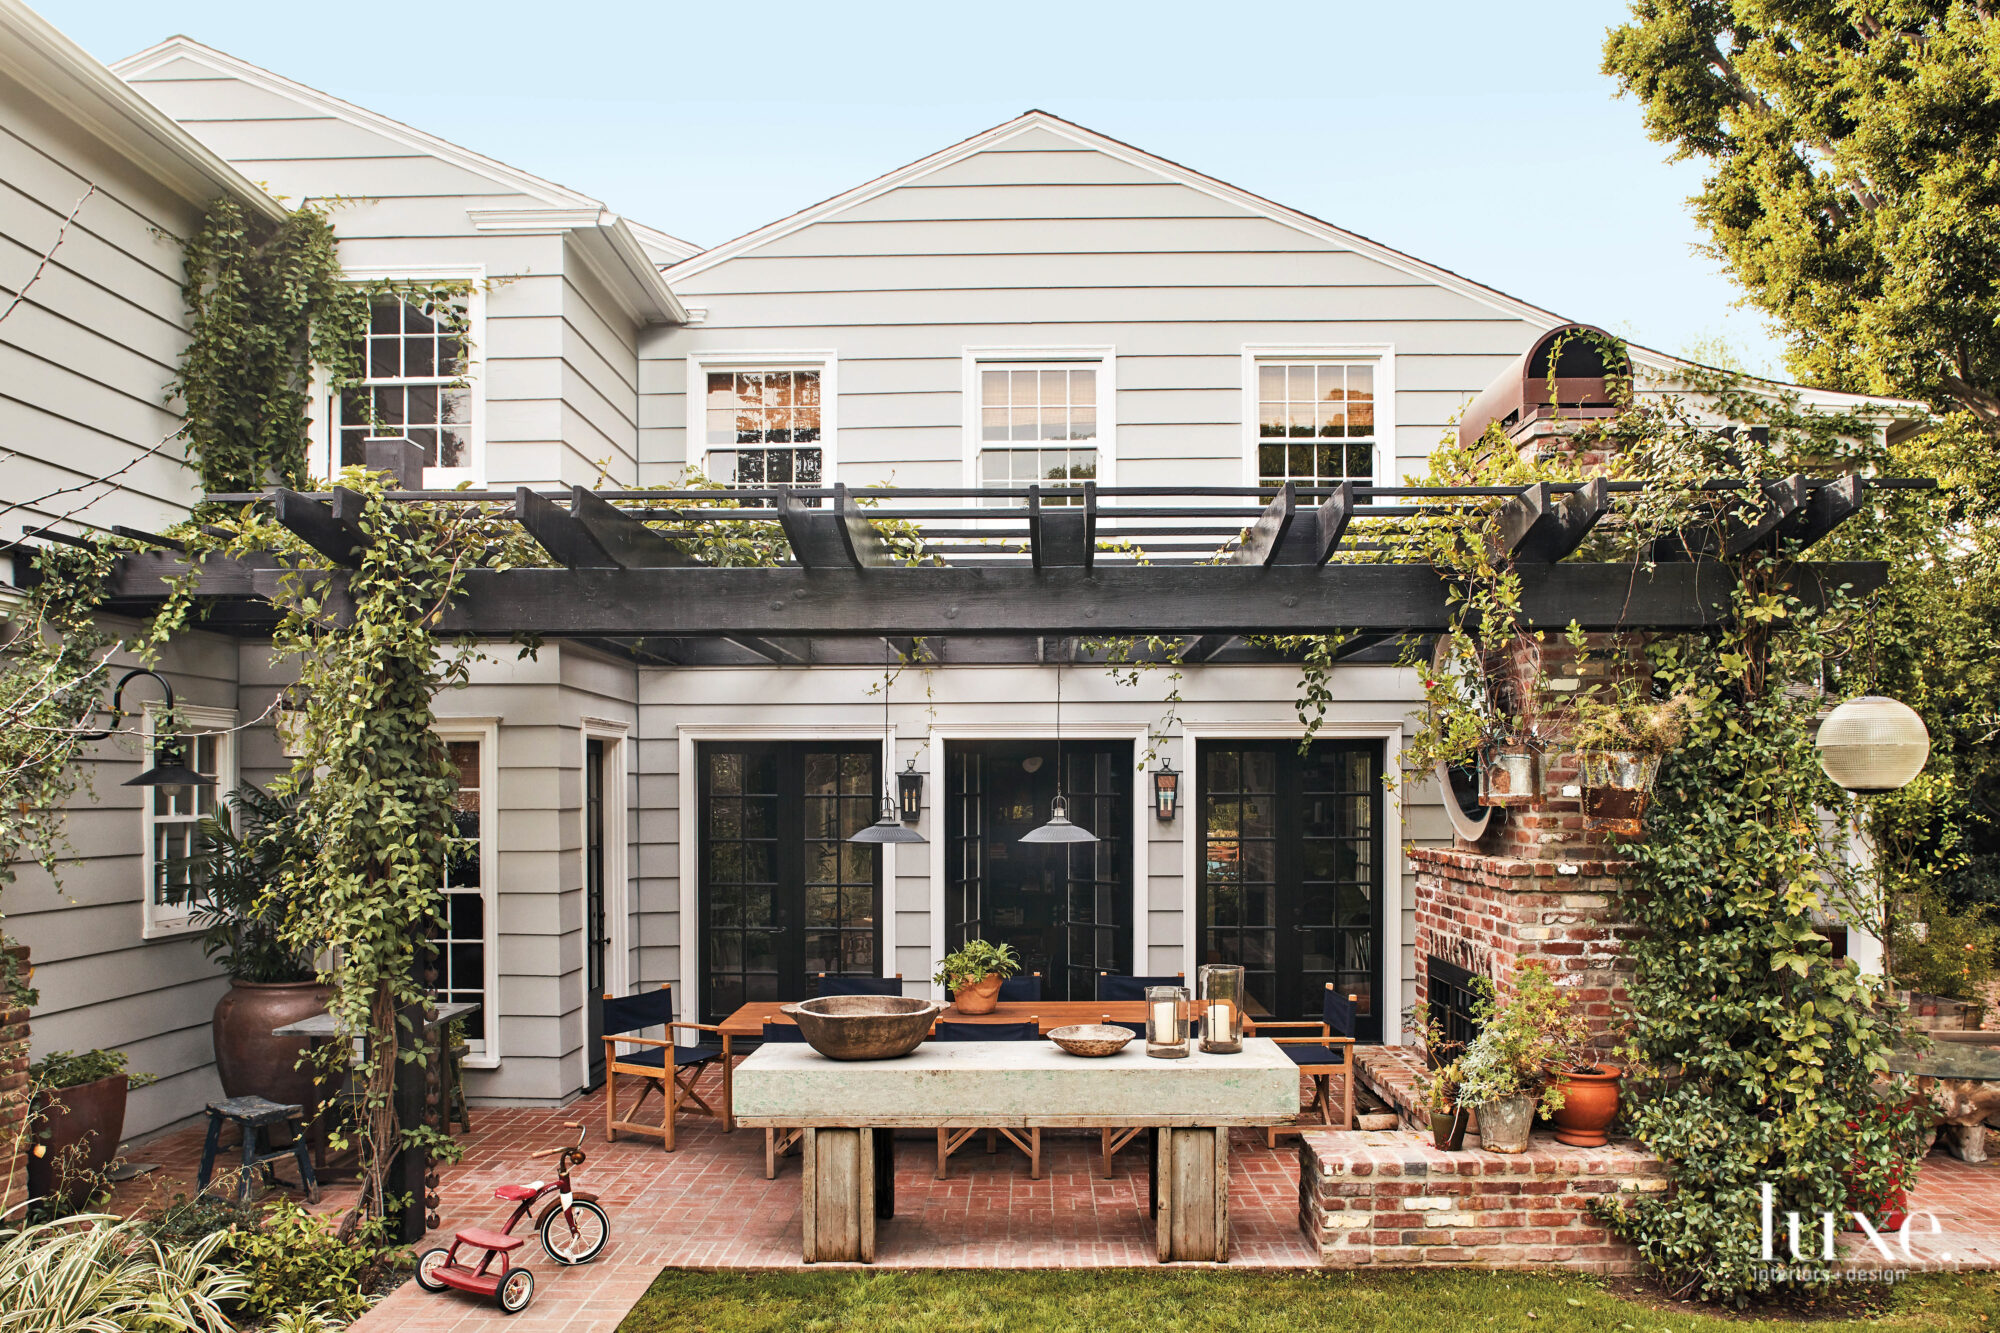 Exterior dining terrace of Los Angeles colonial revival.